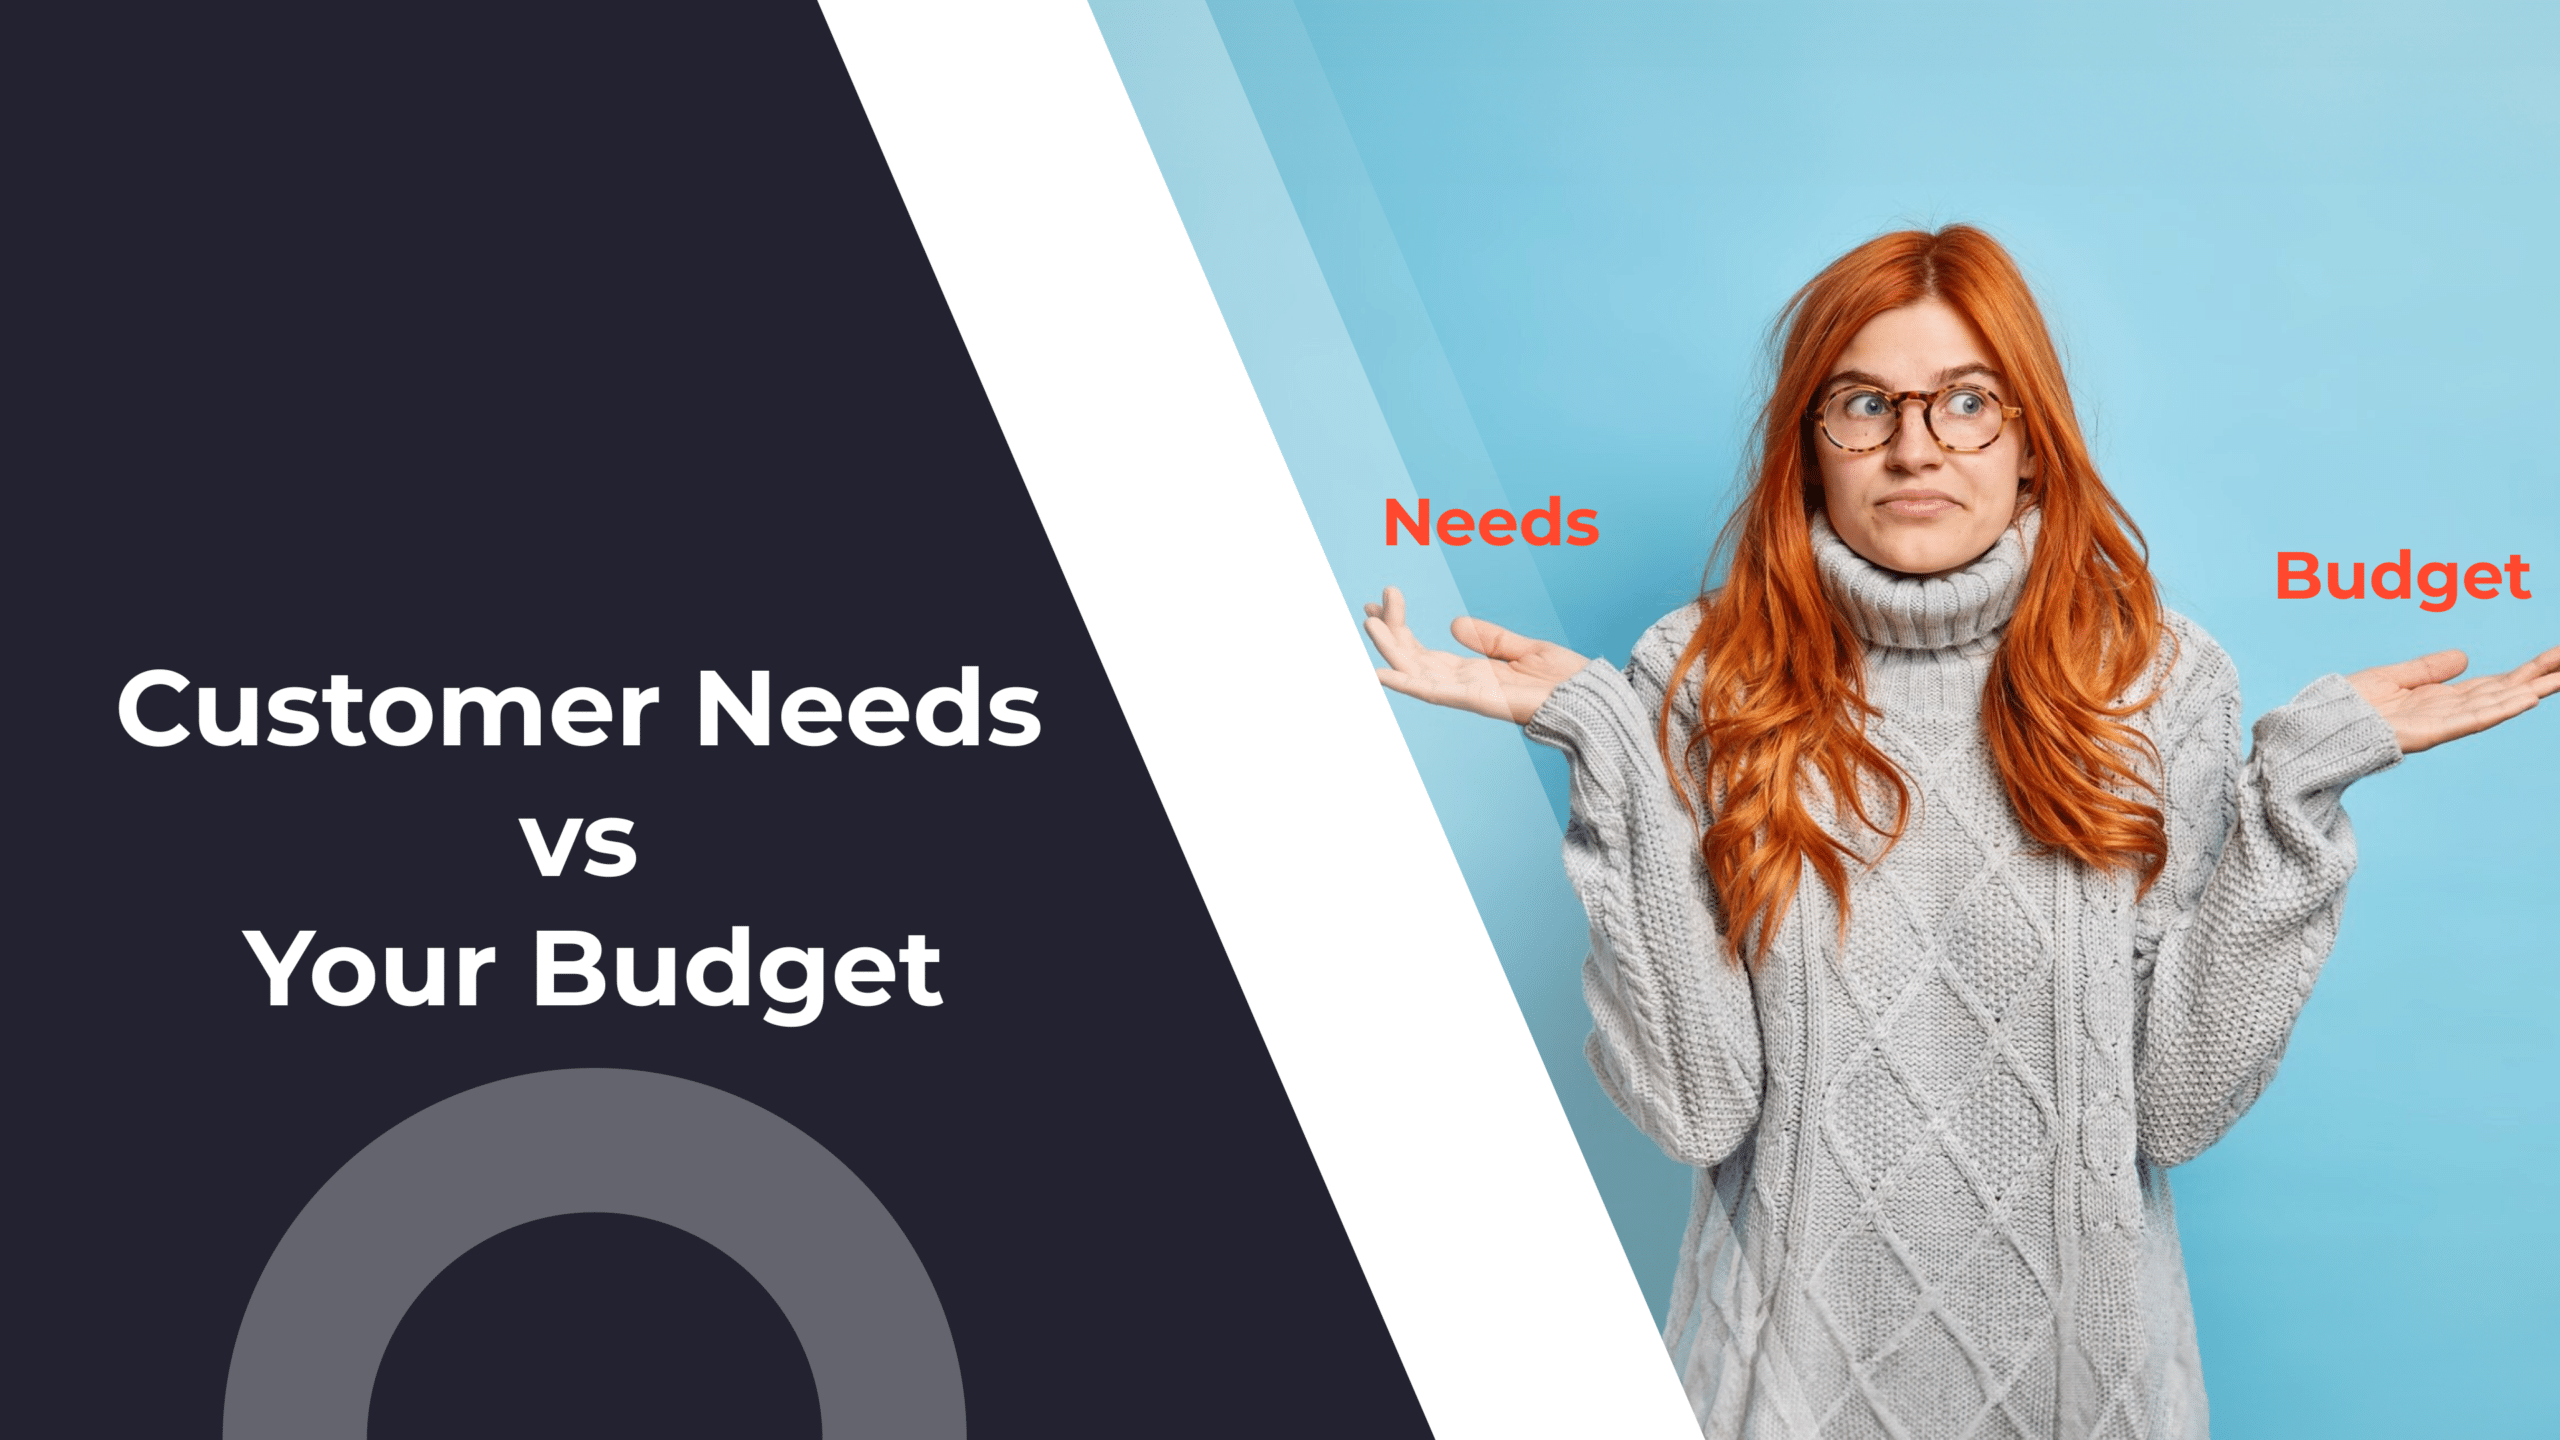 How to Prioritize Customer Needs and Stick to Your Budget